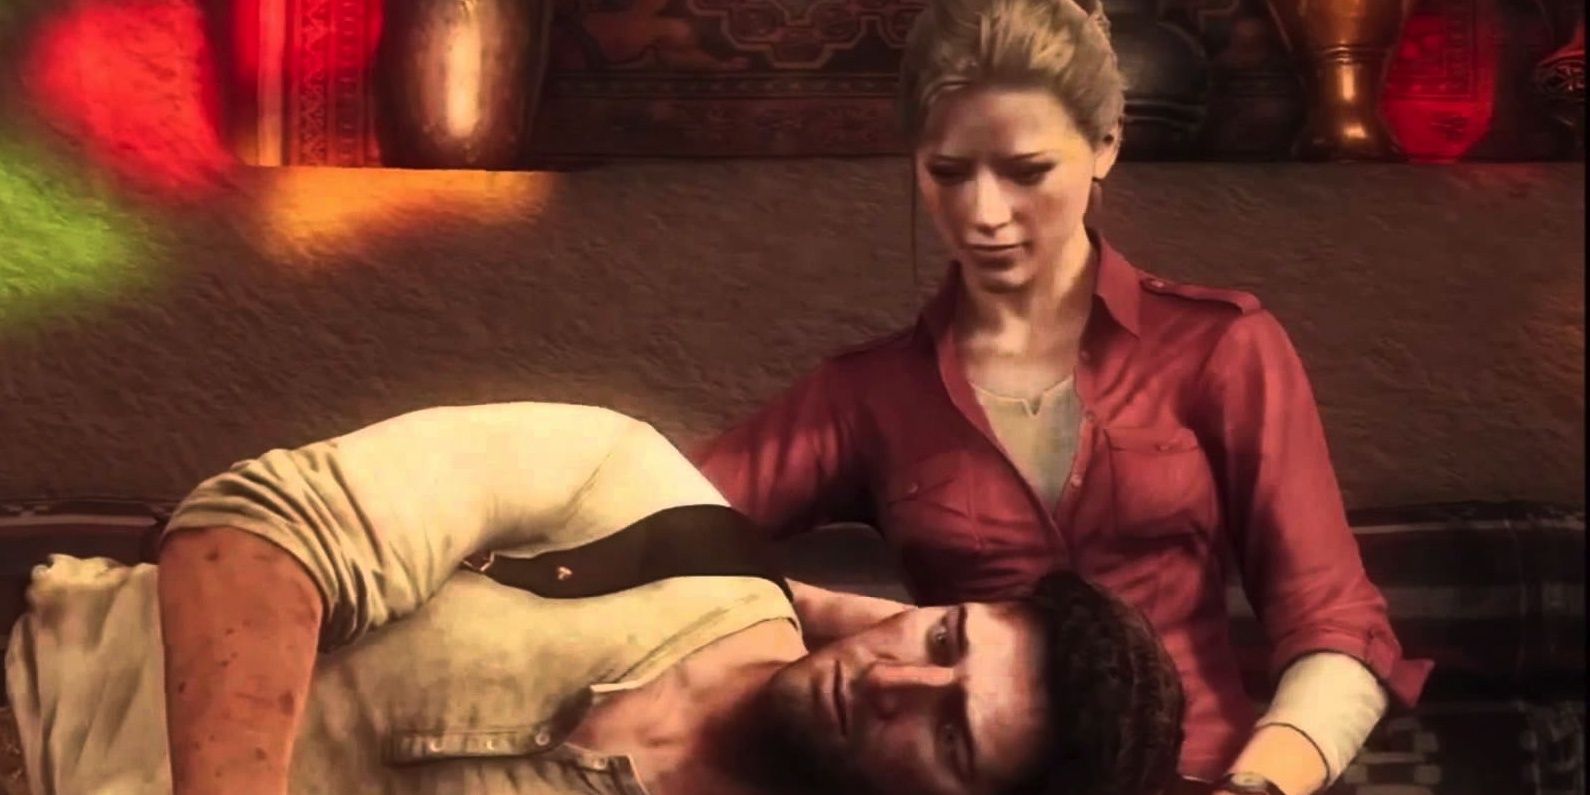 Nate rests his head on Elena's lap in Uncharted 3 